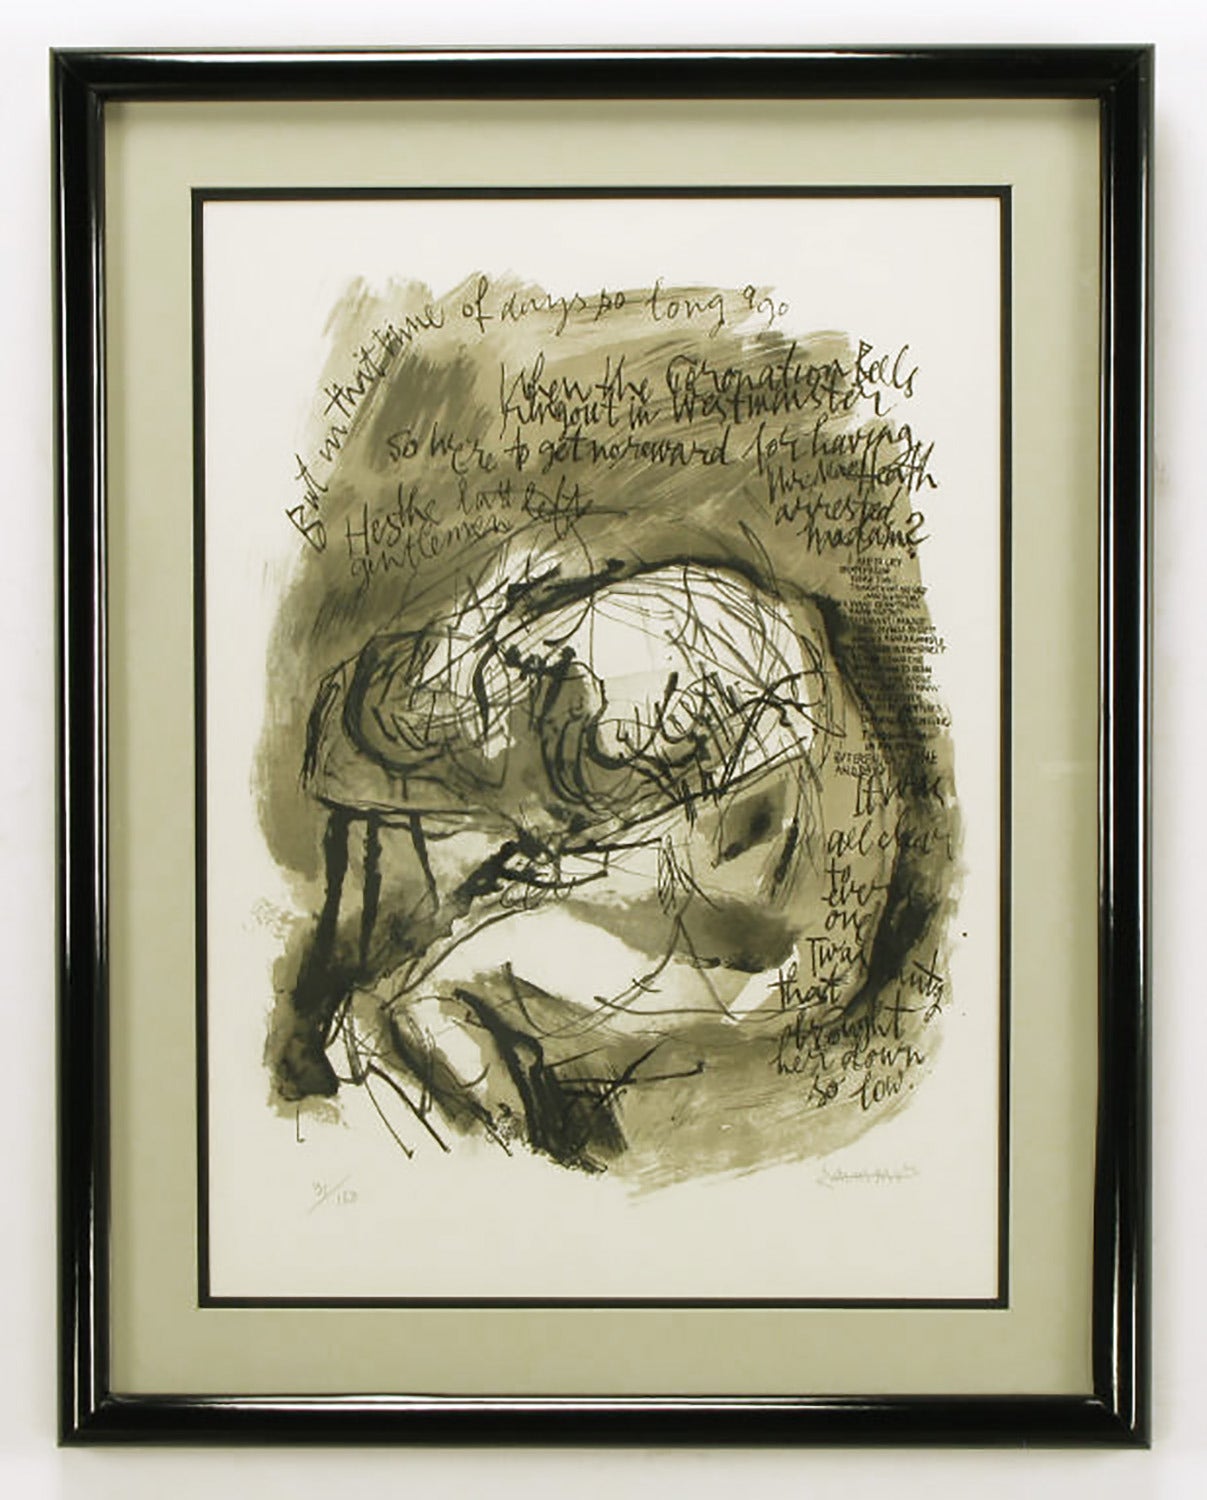 Abraham Rattner (1893-1978) surrealist print of an abstract human figure in black and white with various words and verse. Low numbered short run print with grey mat and black lacquer over wood frame.

Rattner, who lived in Paris from 1920-1940,